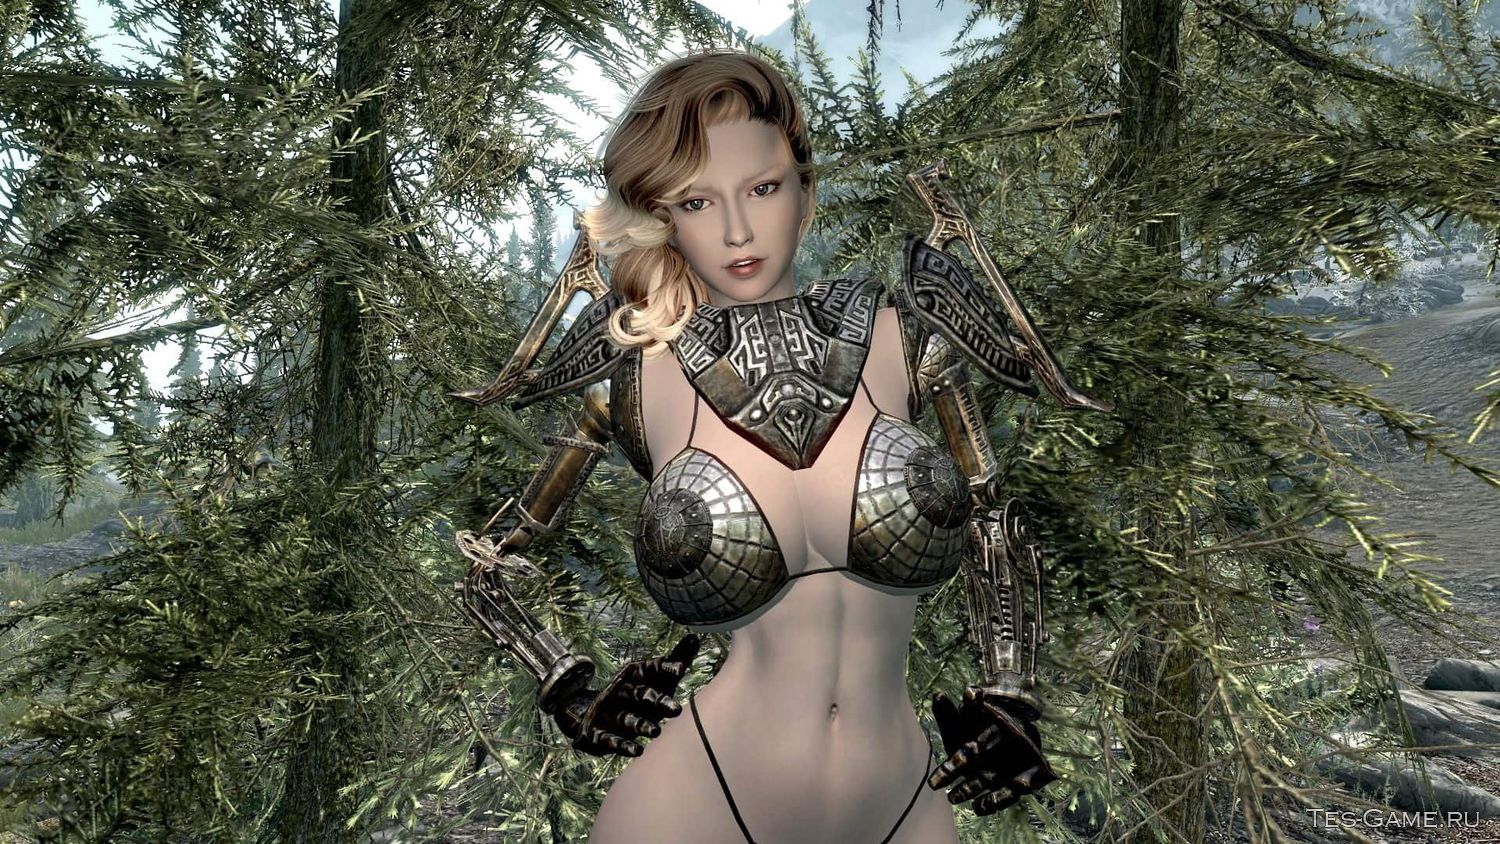 Skyrim vr playing with boobs